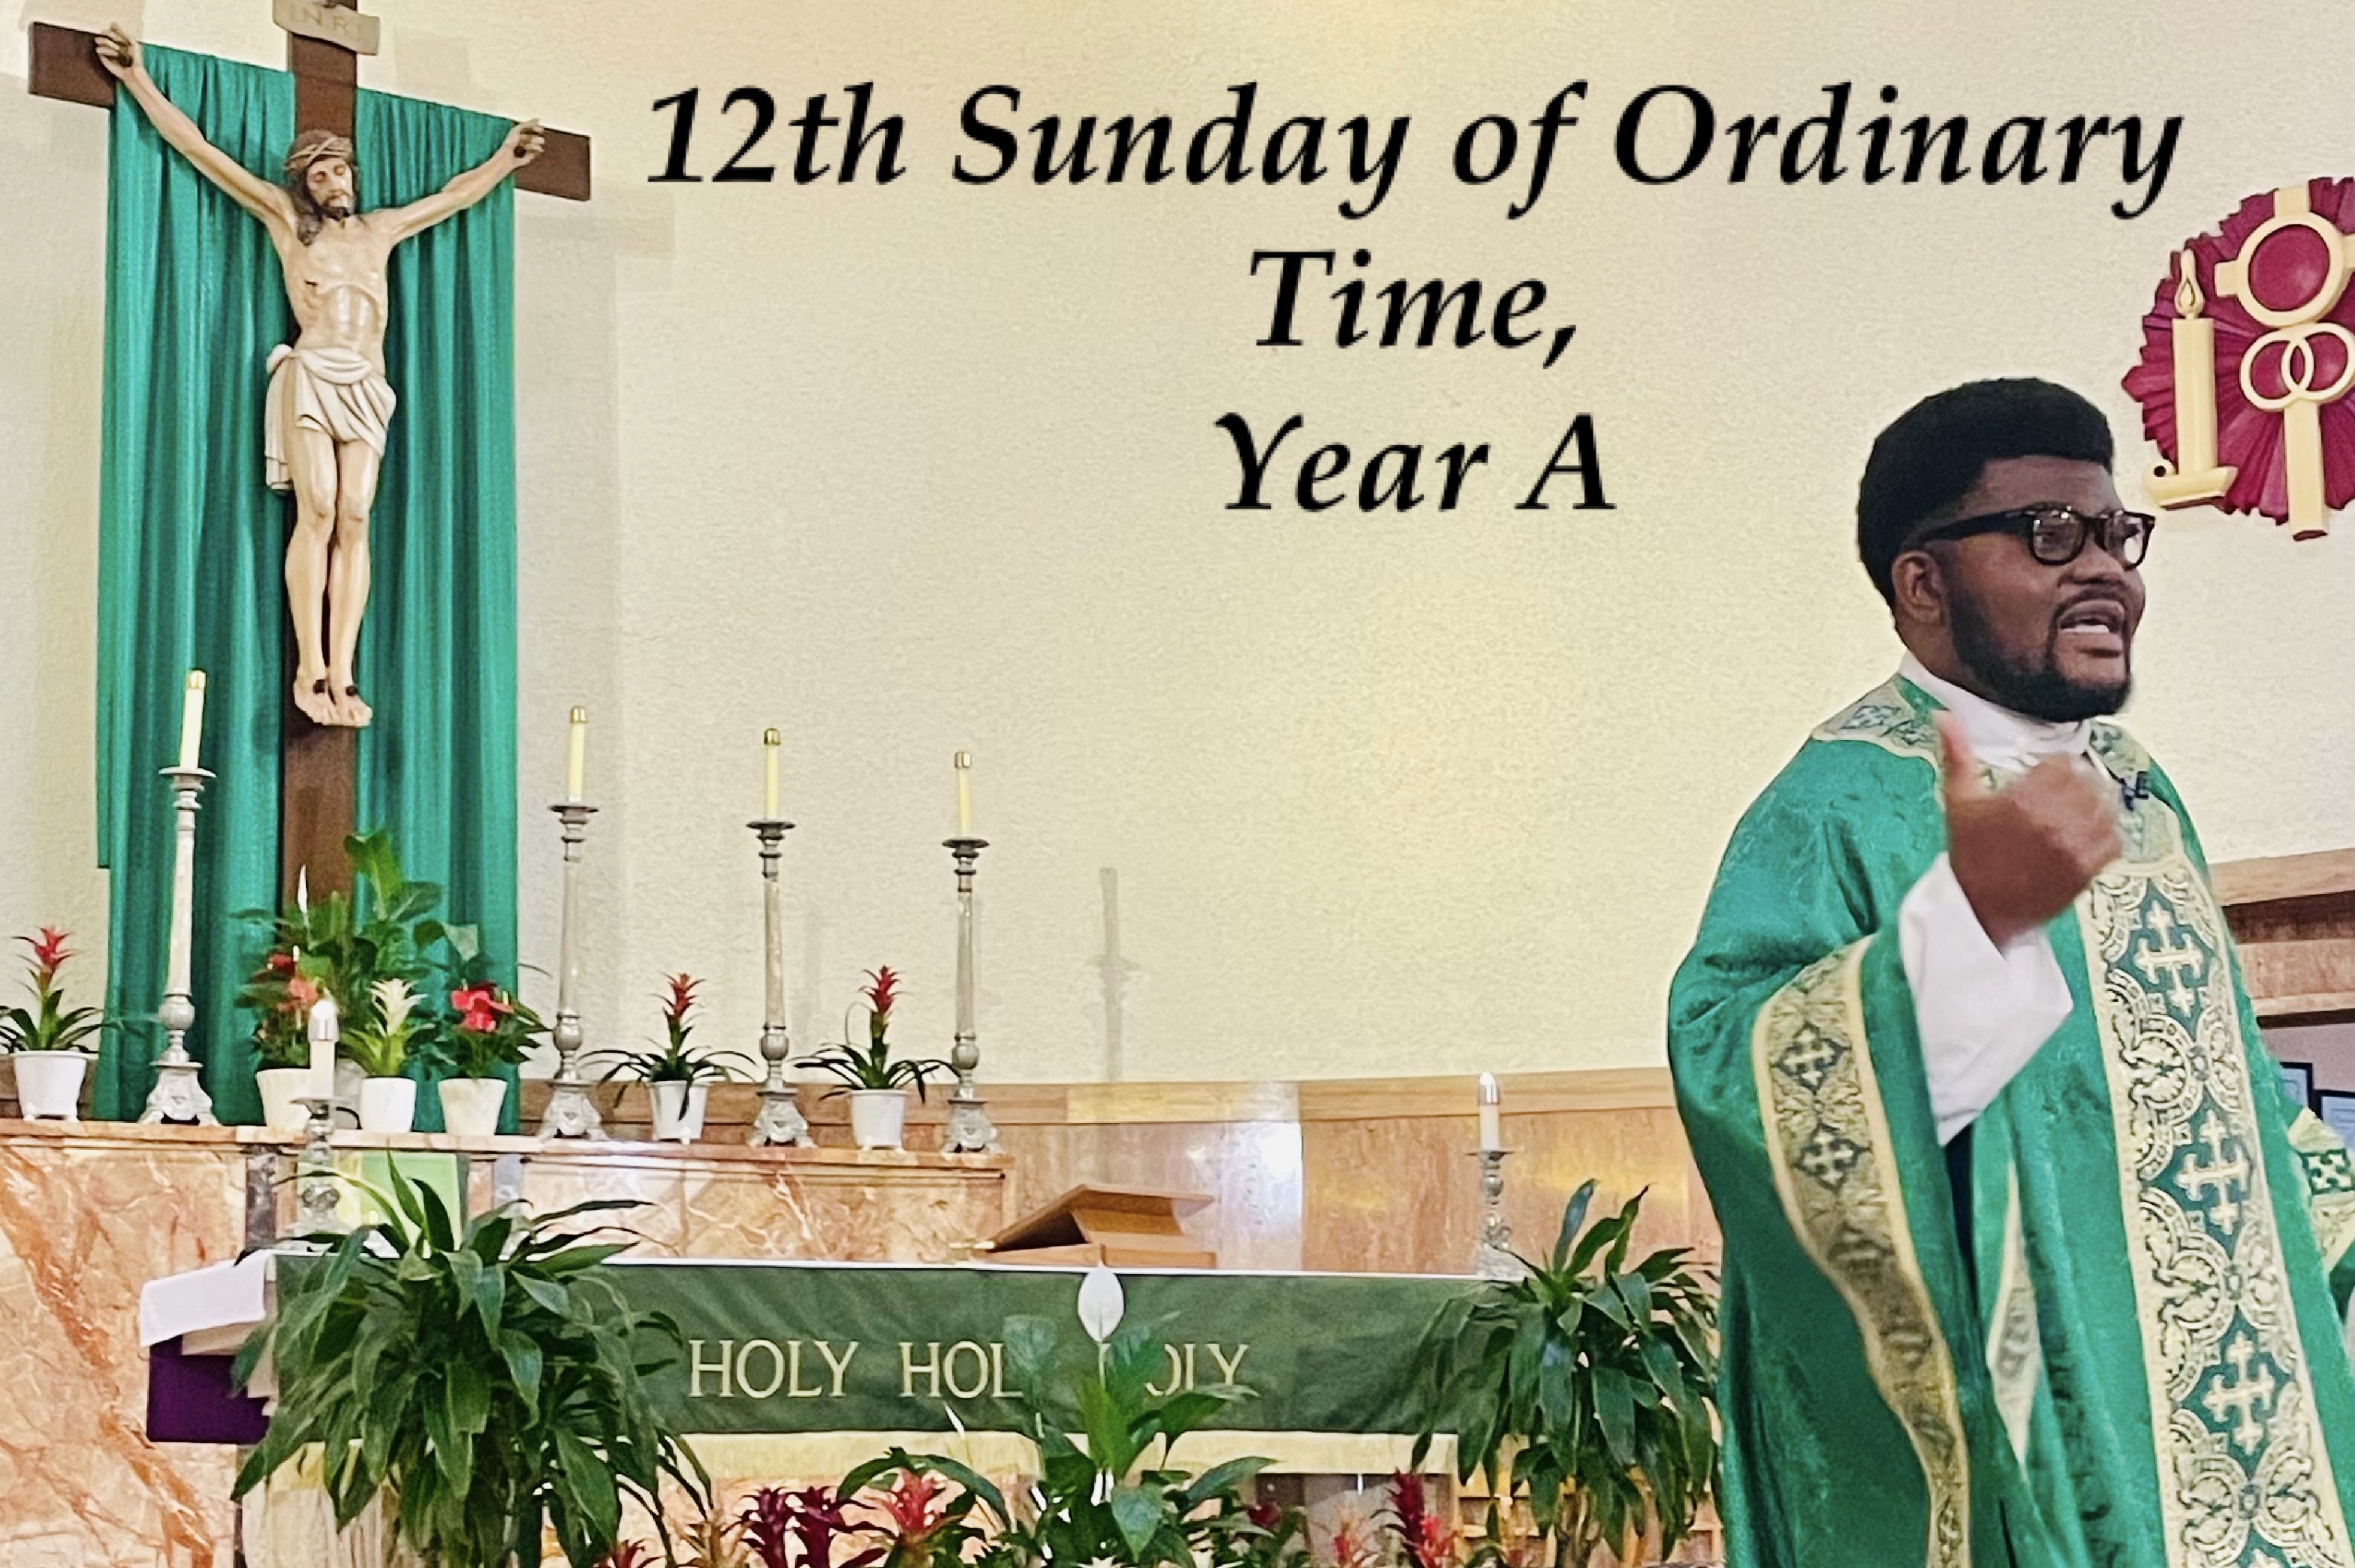 12th Sunday of Ordinary Time, Year A